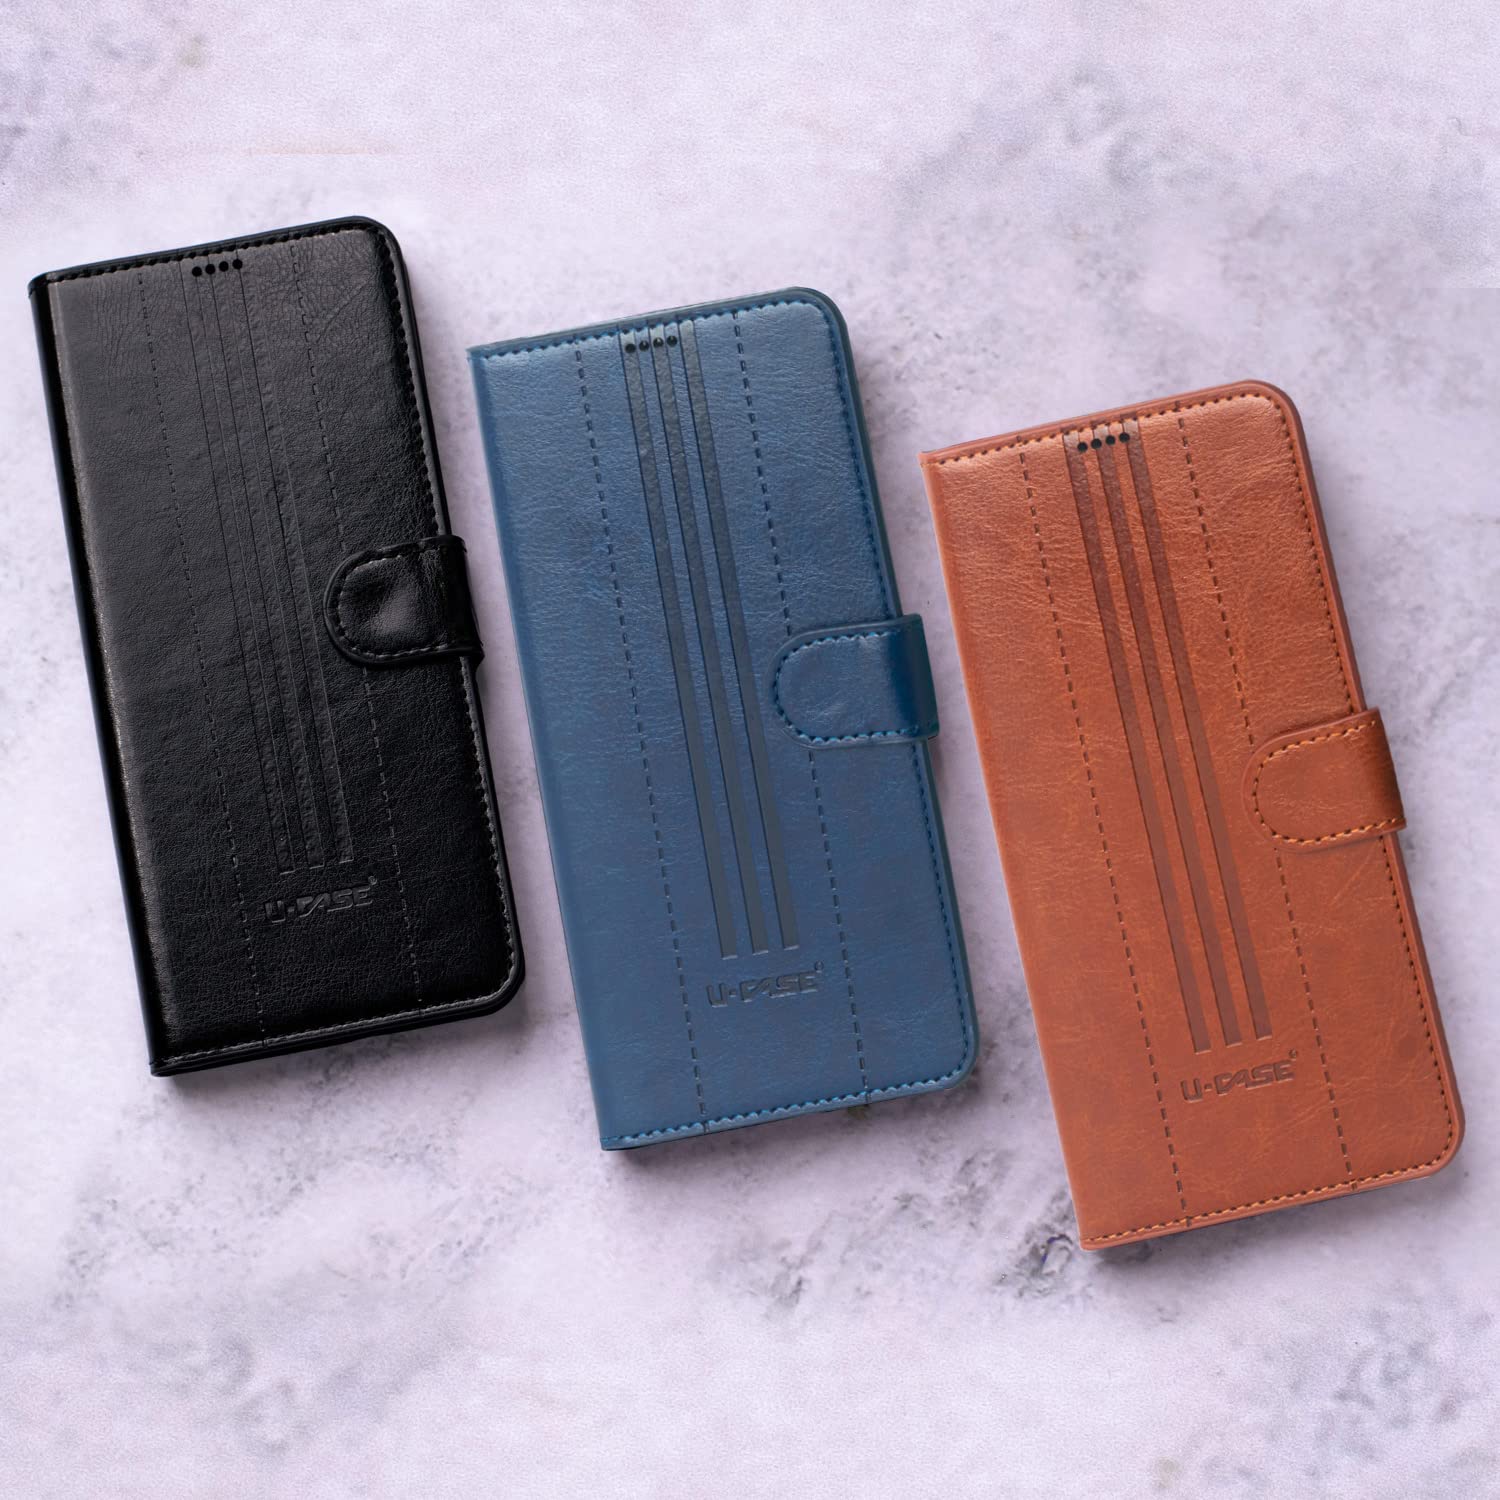 Shop U-CASE Flip Cover for Oppo A71 Vegan Foldable Stand & Pocket Magnetic Closure colors